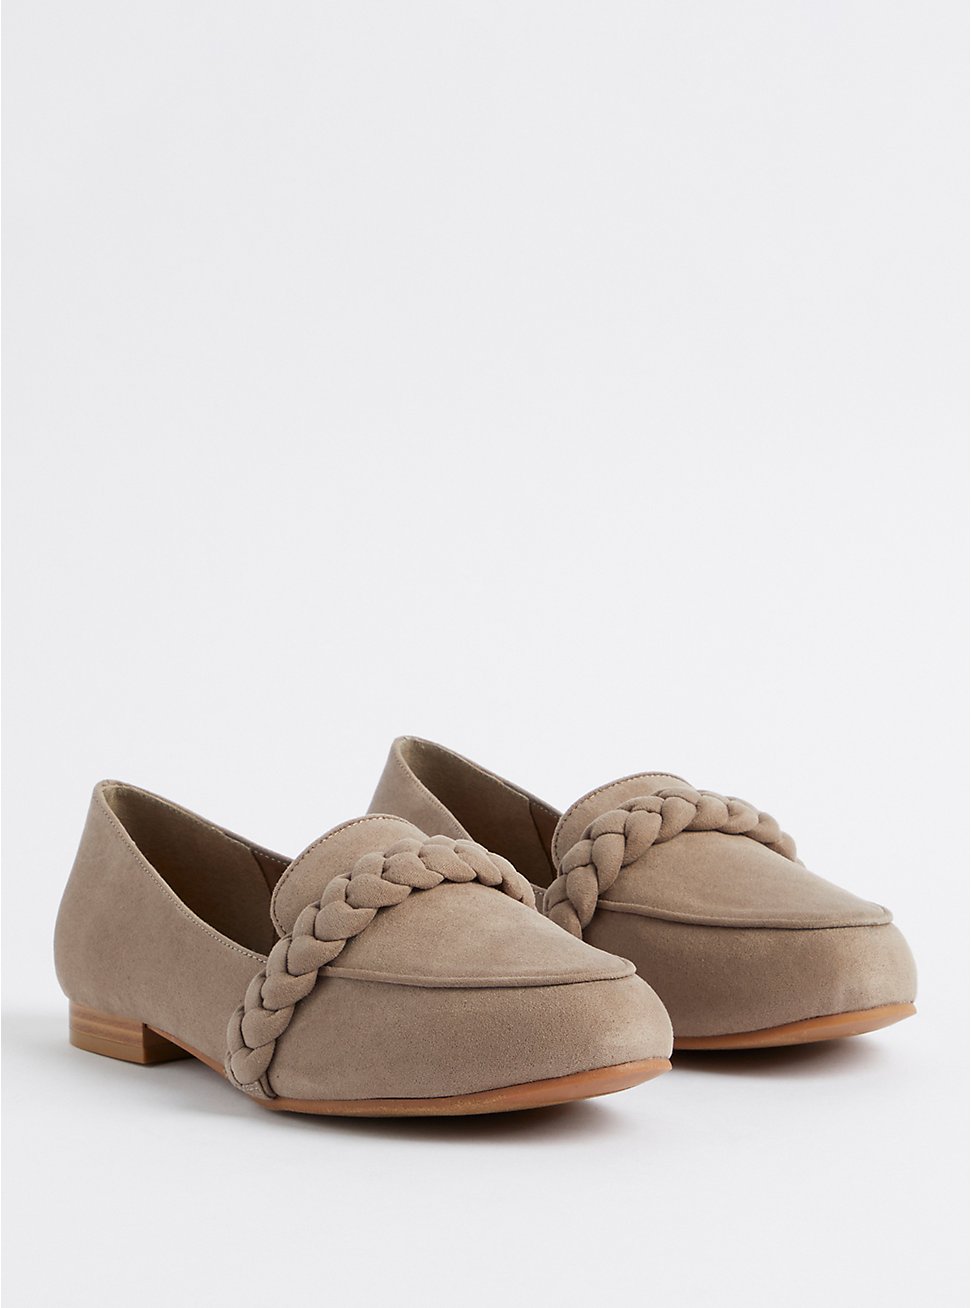 Plus Size Braided Twist Loafer - Taupe (WW), TAUPE, hi-res